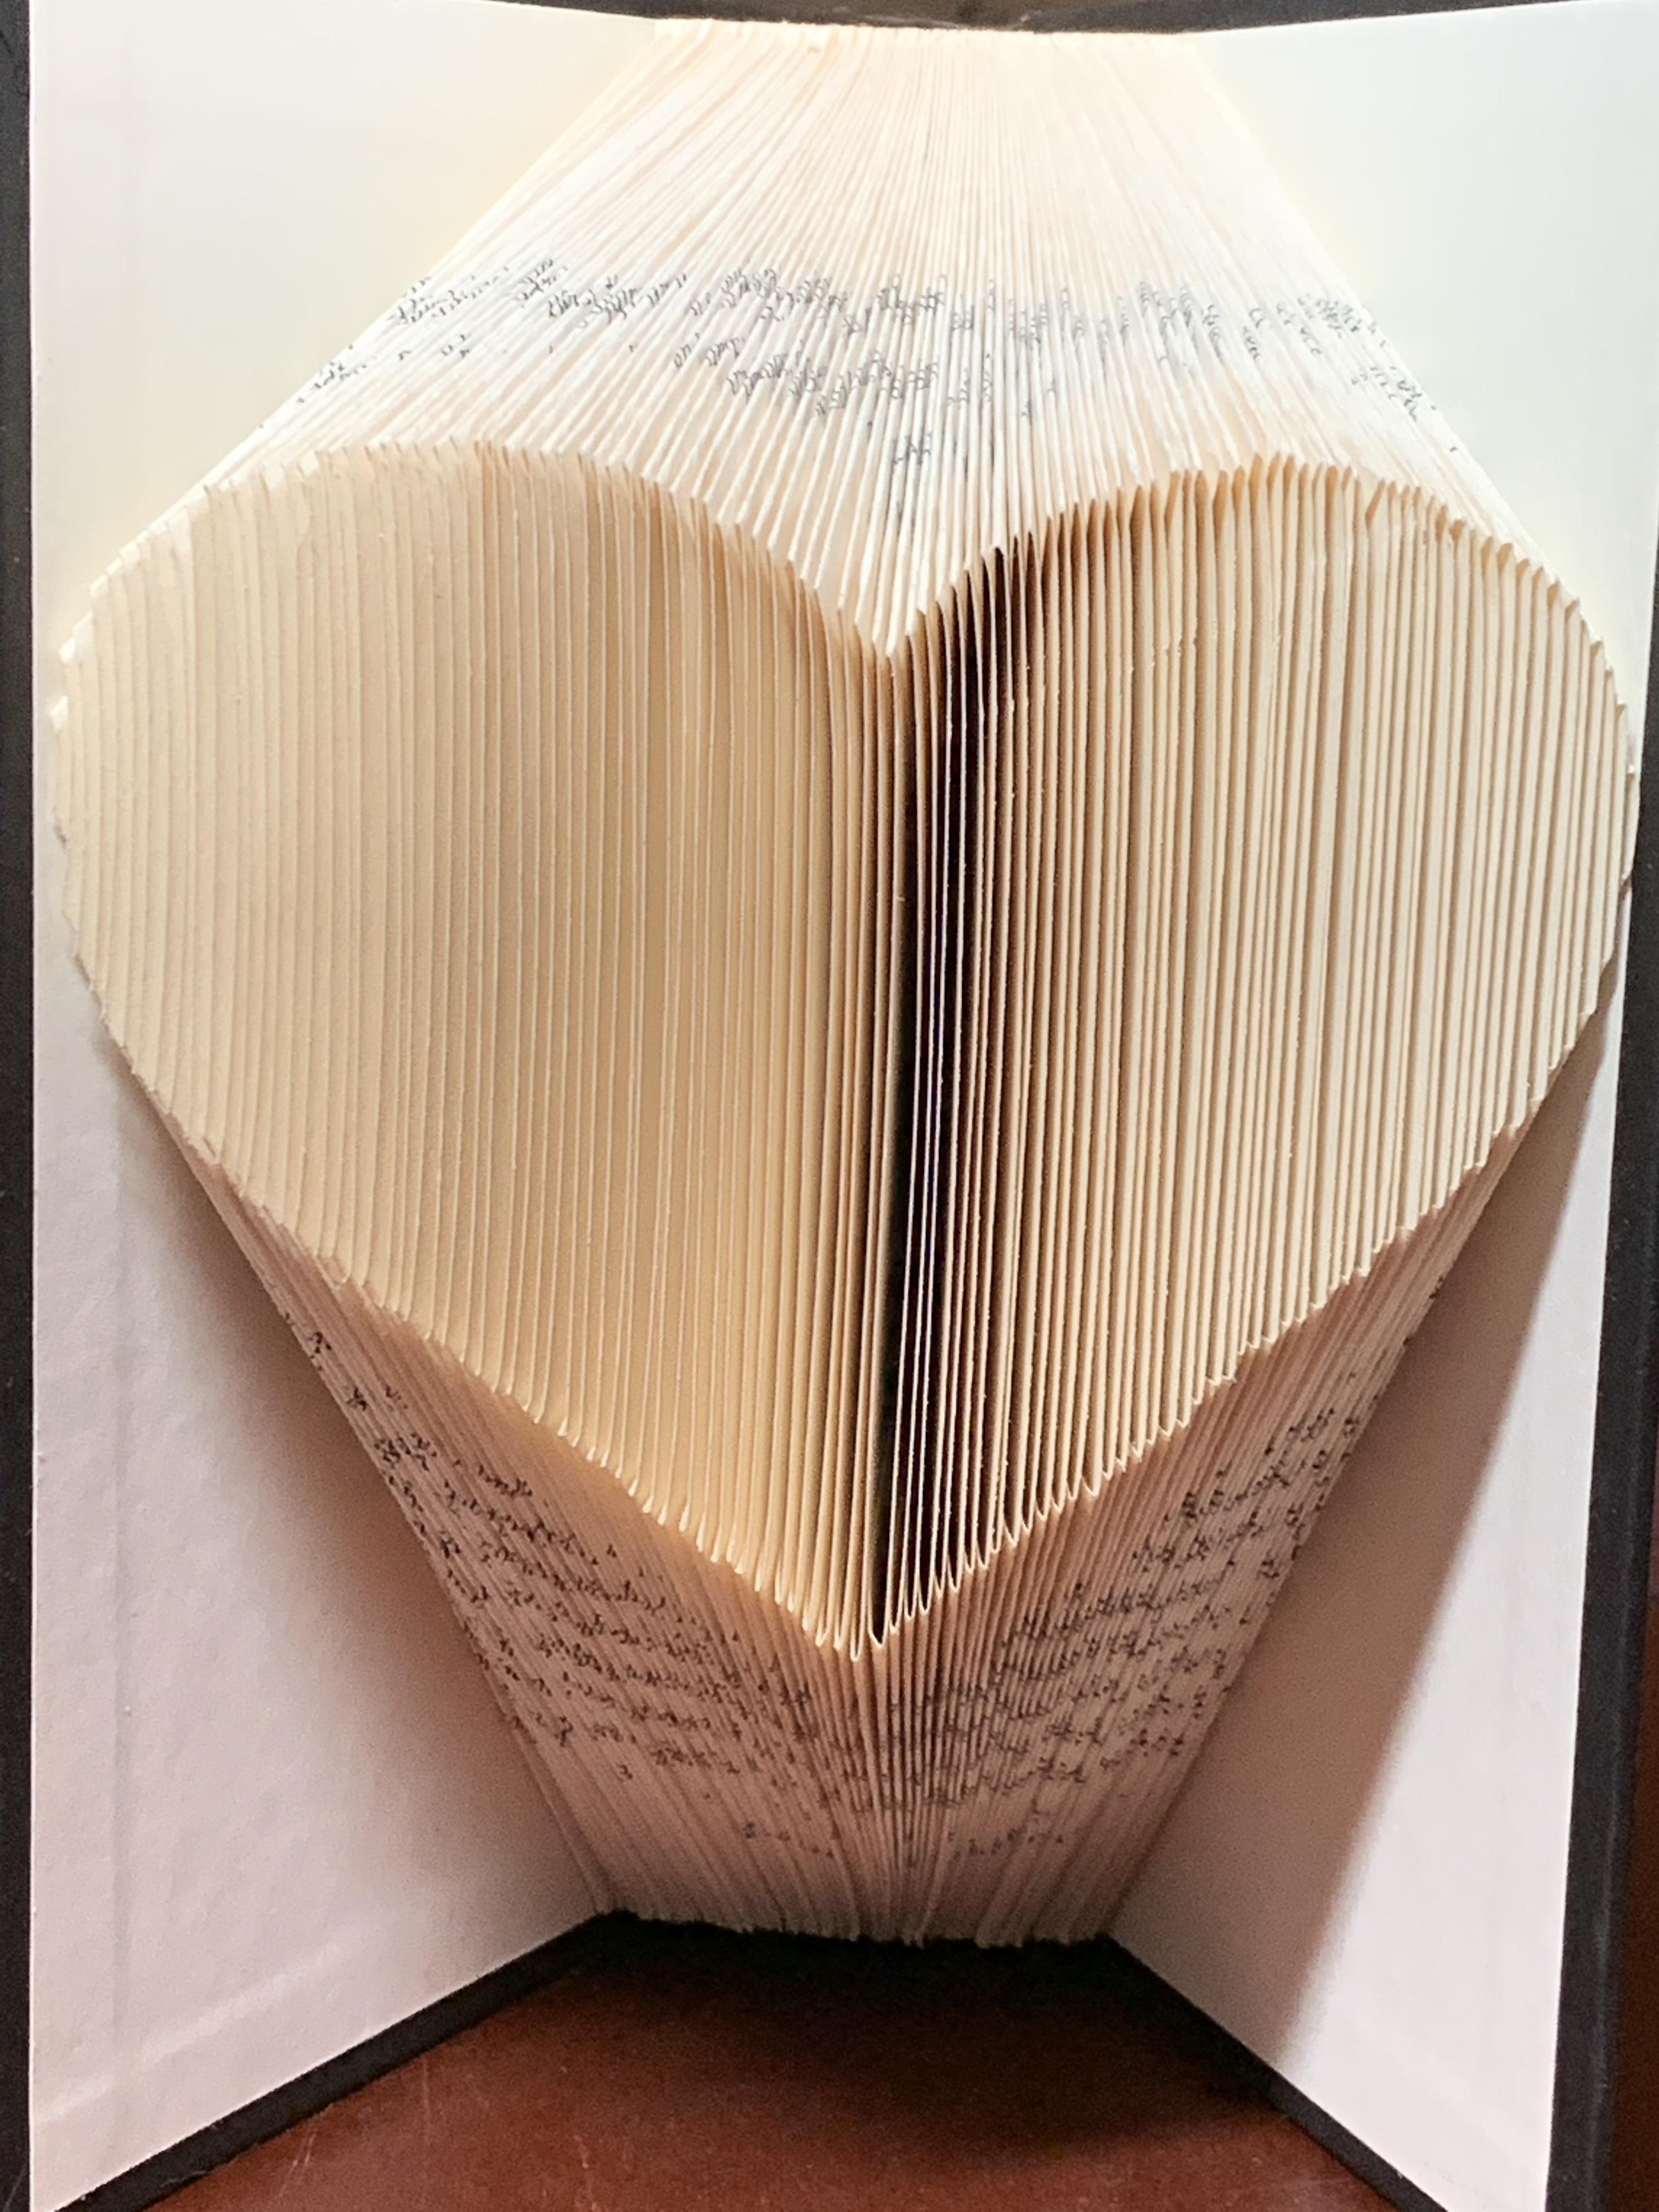 An example of the craft - a book with pages folded to create a heart shape